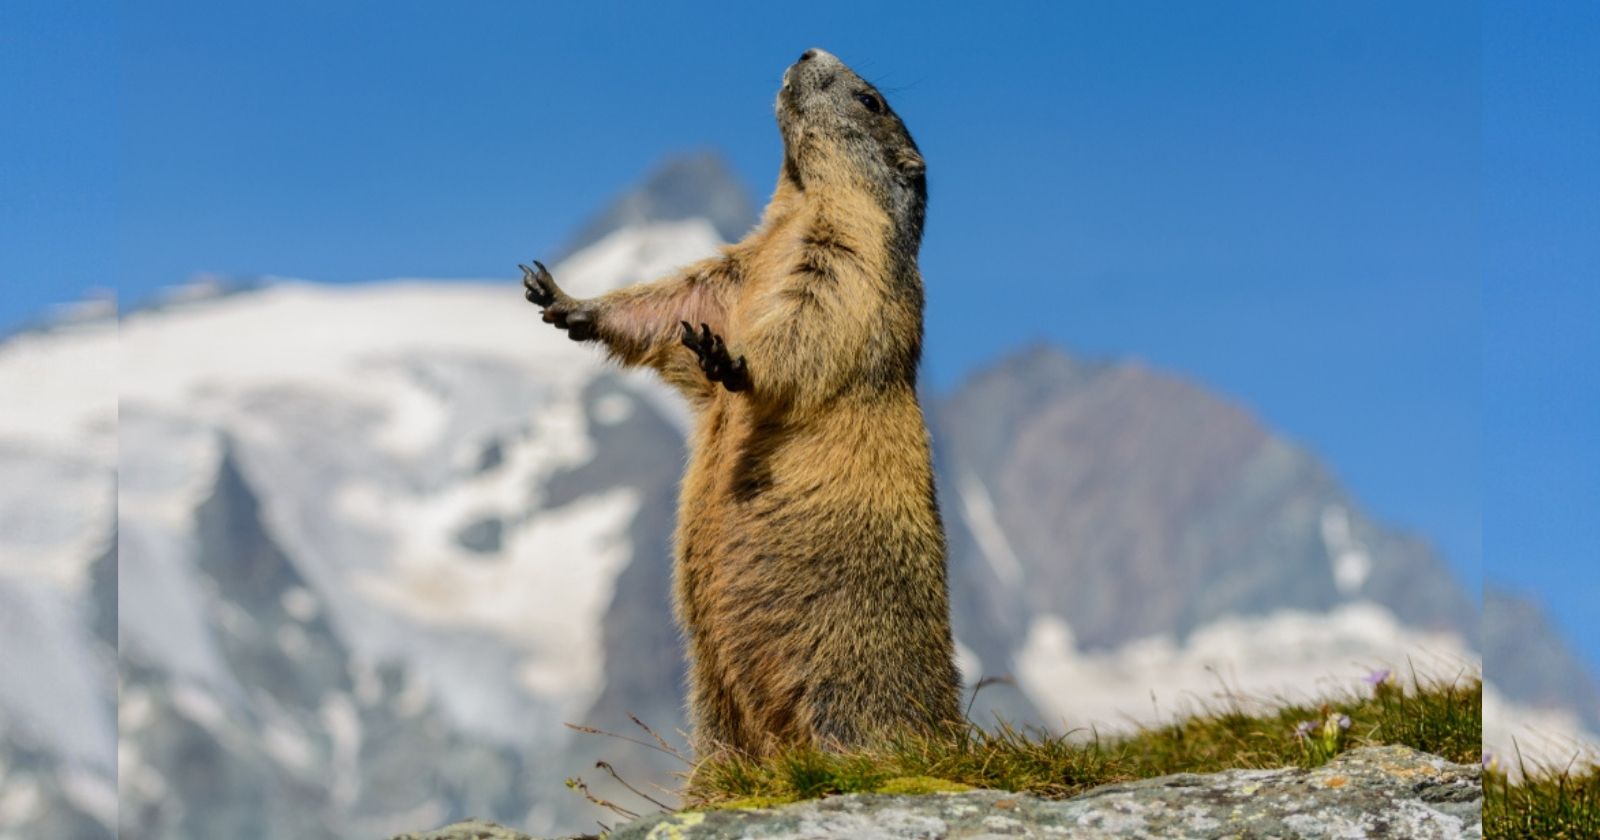 If you like marmots, don't photograph them